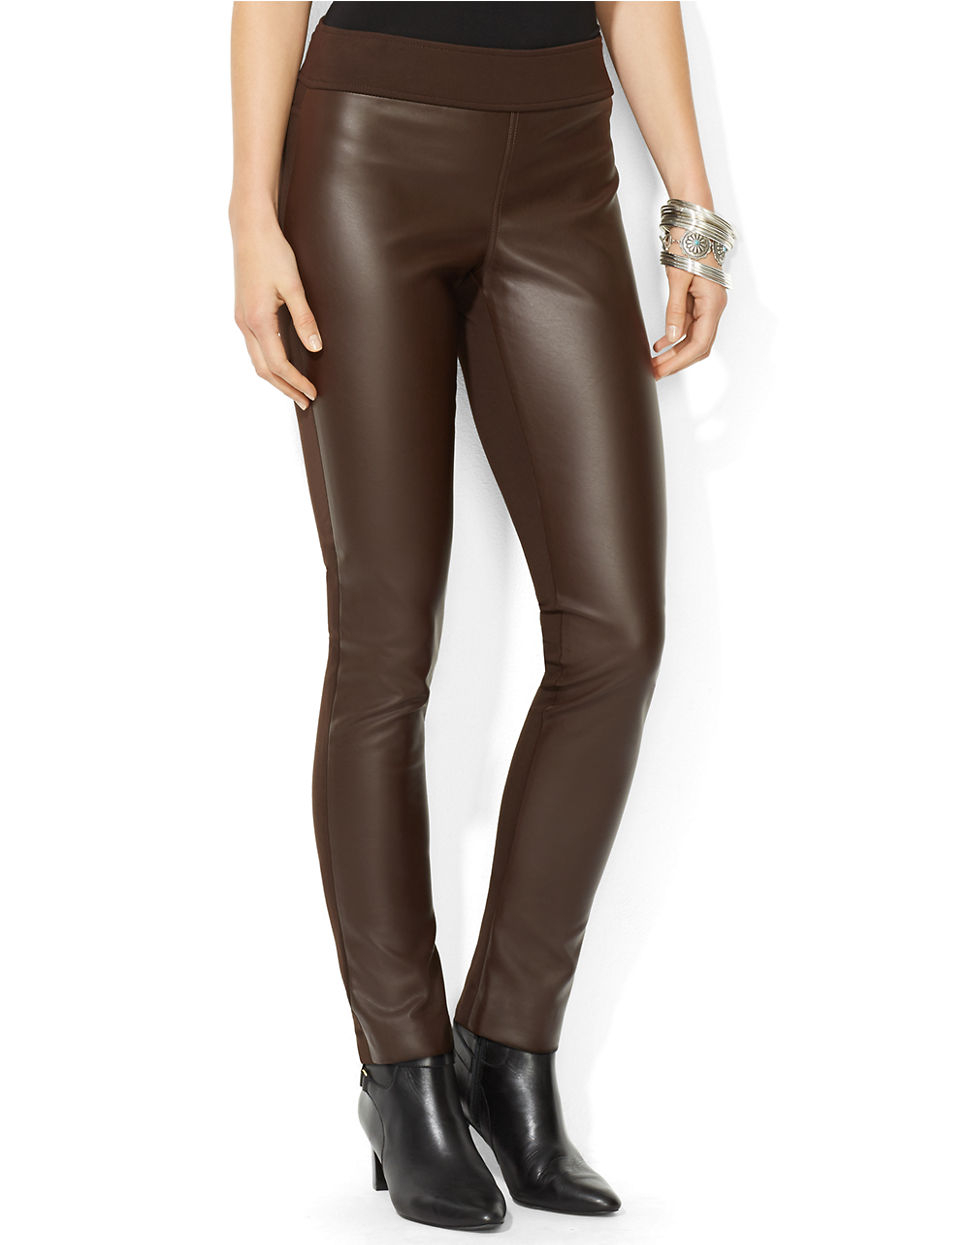 Lyst - Lauren By Ralph Lauren Petite Stretch Faux Leather Pant in Brown